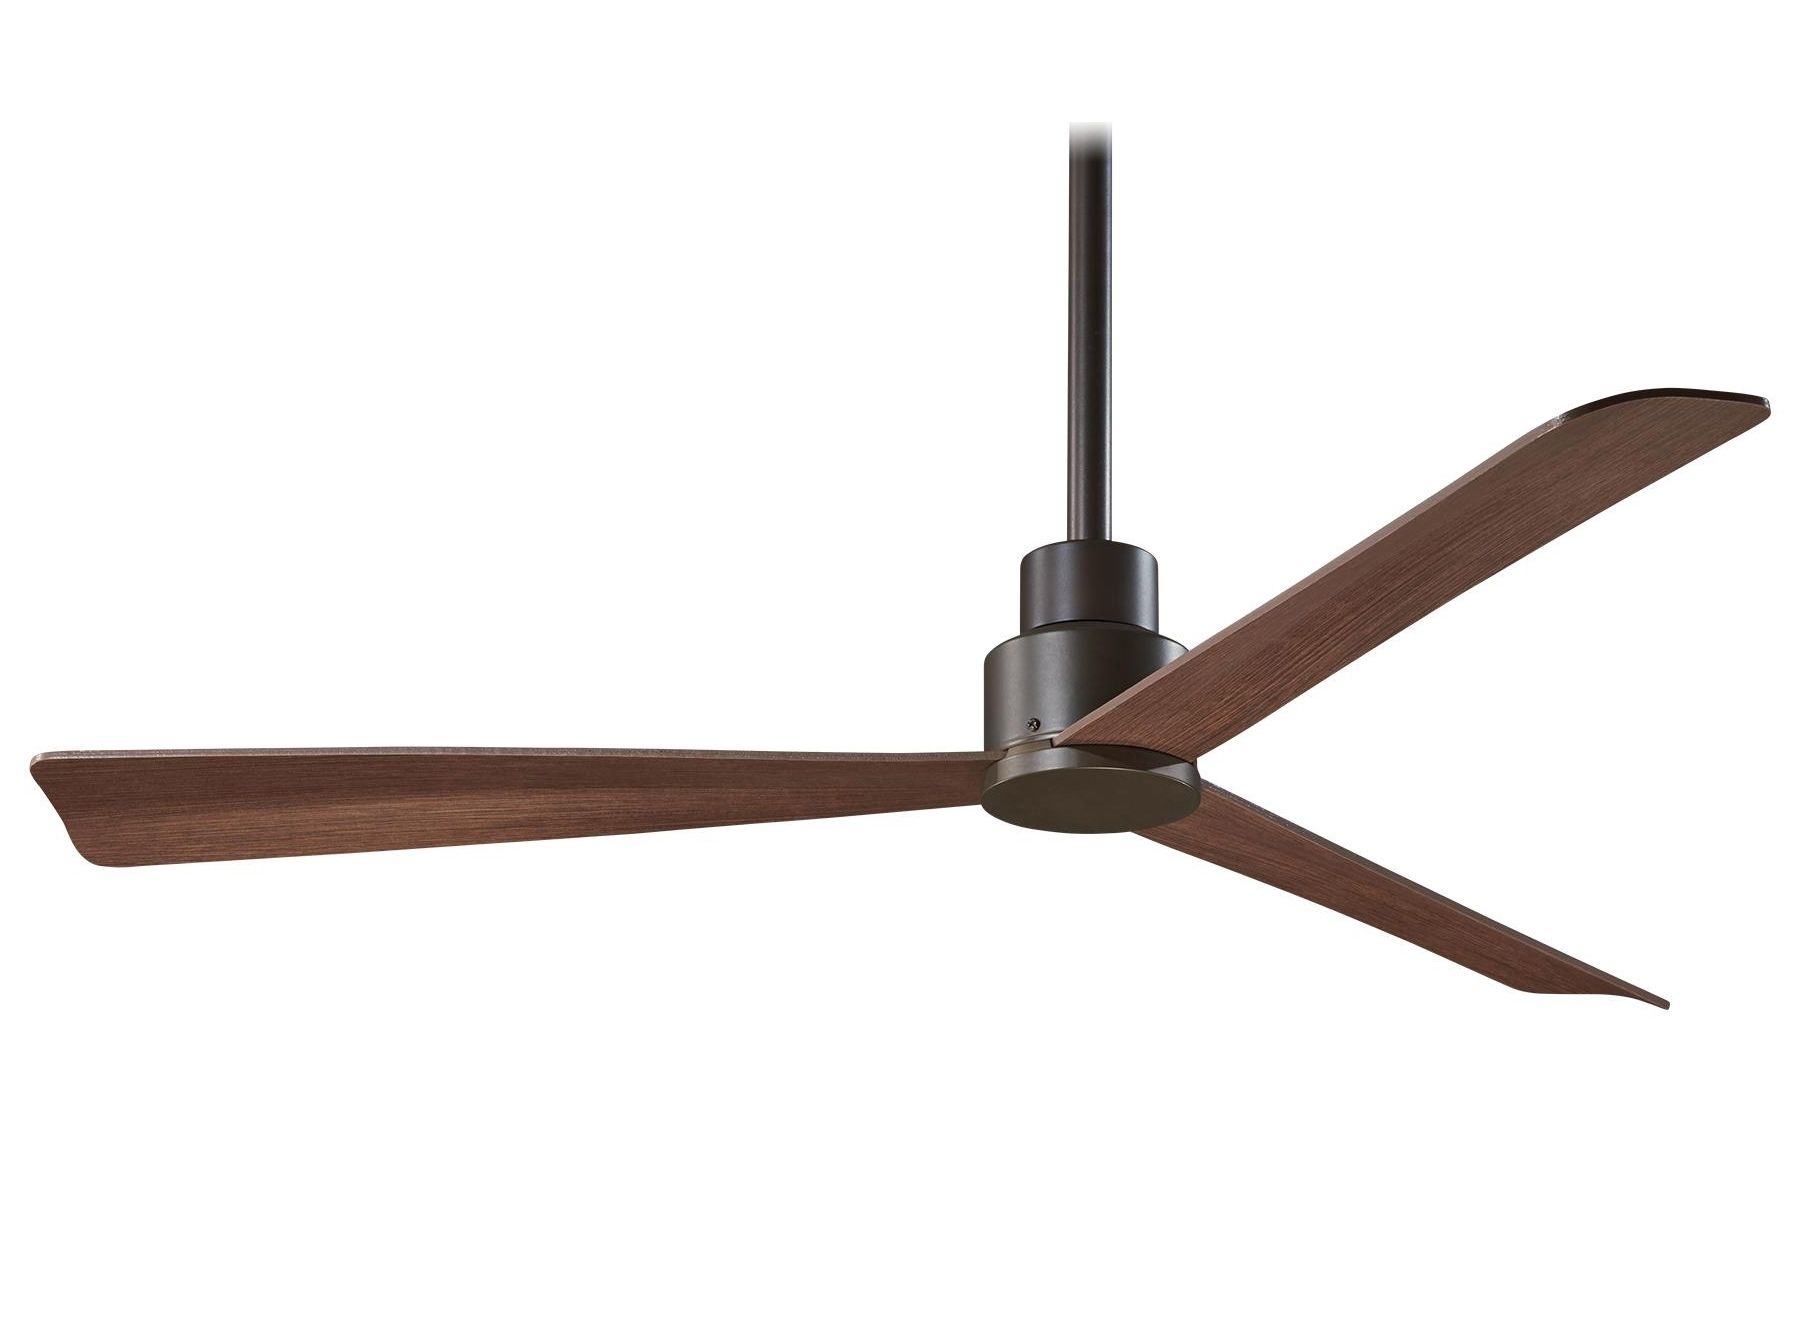 F787 Orb For Most Up To Date Minka Outdoor Ceiling Fans With Lights (View 8 of 20)